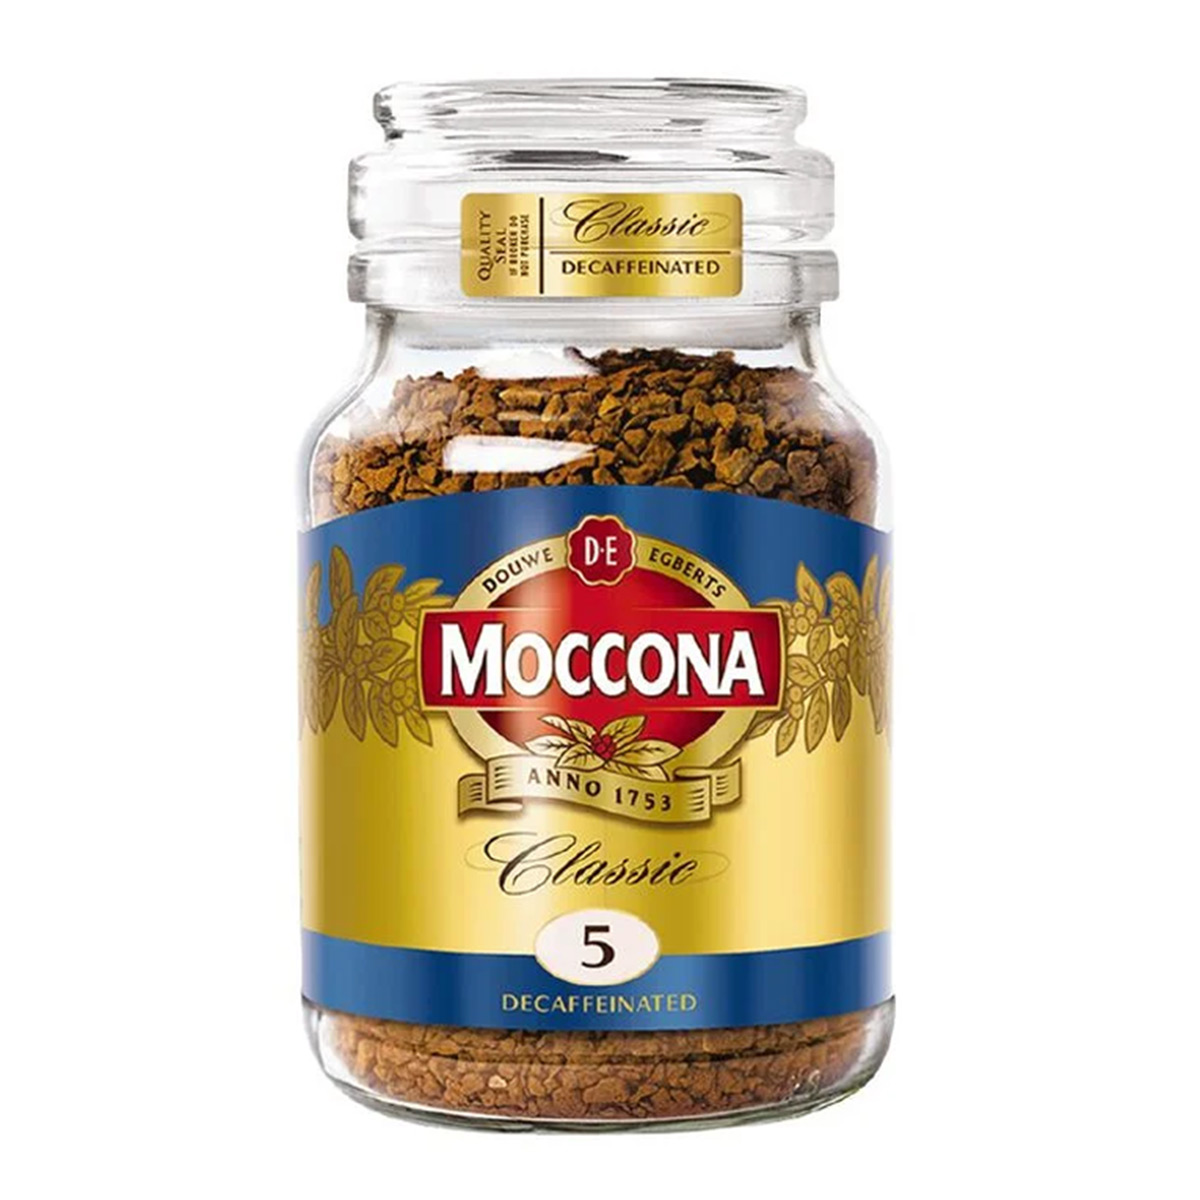 consumables-hospitality-beverage-food-moccona-classic-decaf-coffee-100gm-jar-classic-decaffeinated-instant-coffee-full-bodied-flavour-without-caffeine-vjs-distributors-hawkes-bay-nz-4019241